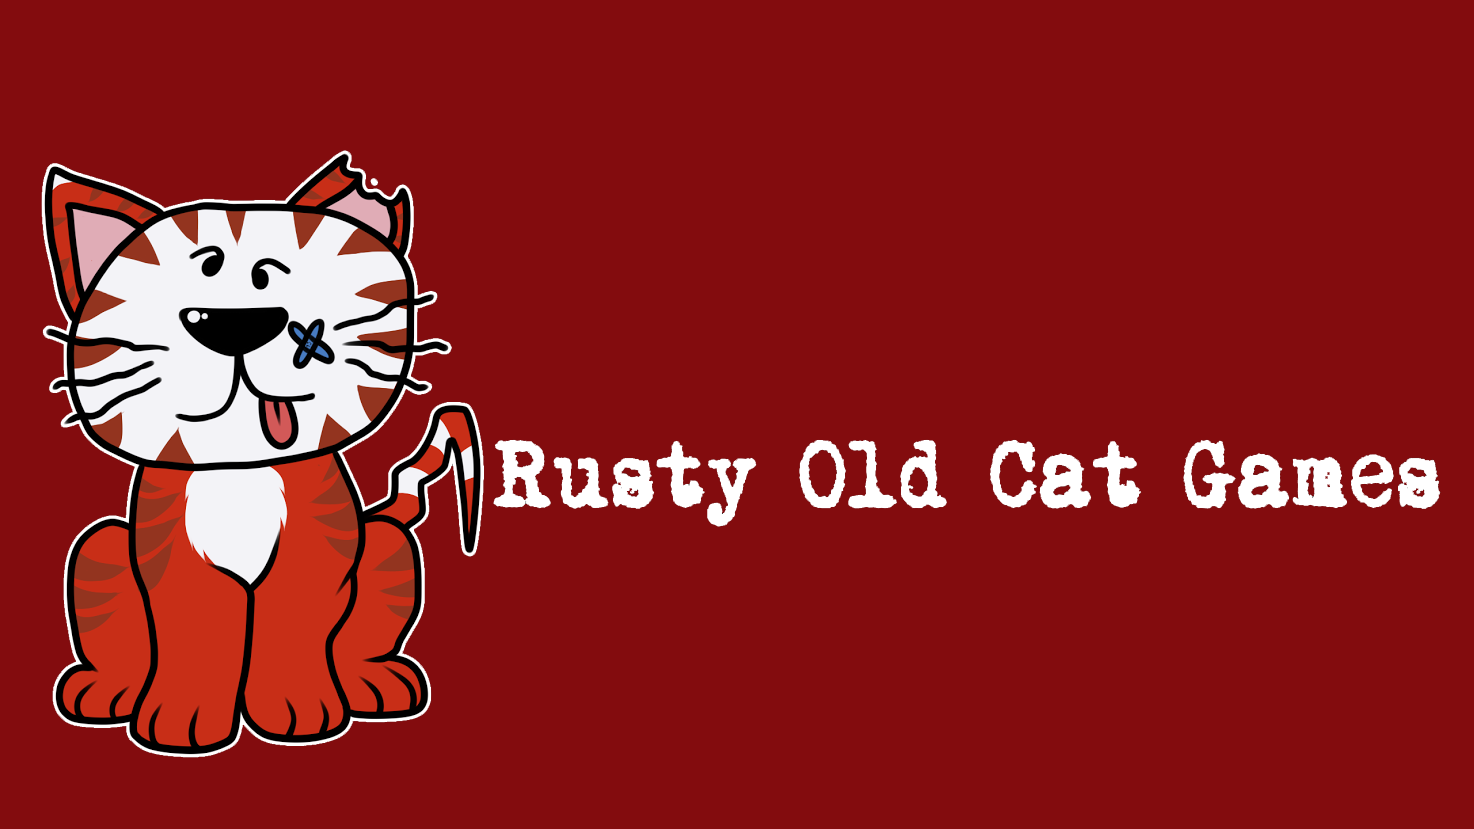 Rusty Old Cat Games